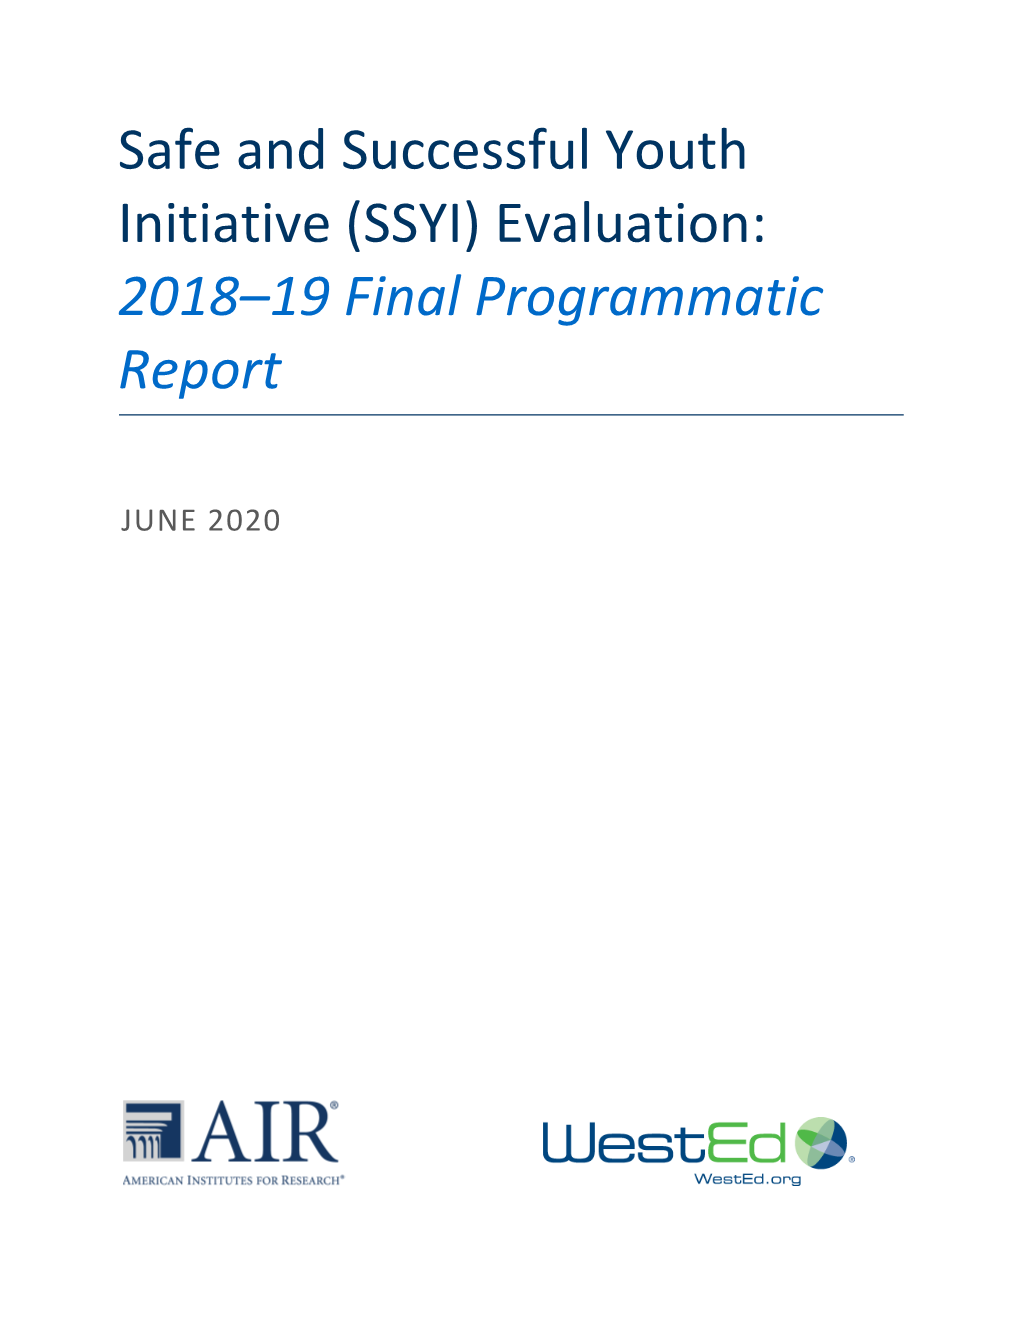 Safe and Successful Youth Initiative (SSYI) Evaluation: 2018–19 Final Programmatic Report